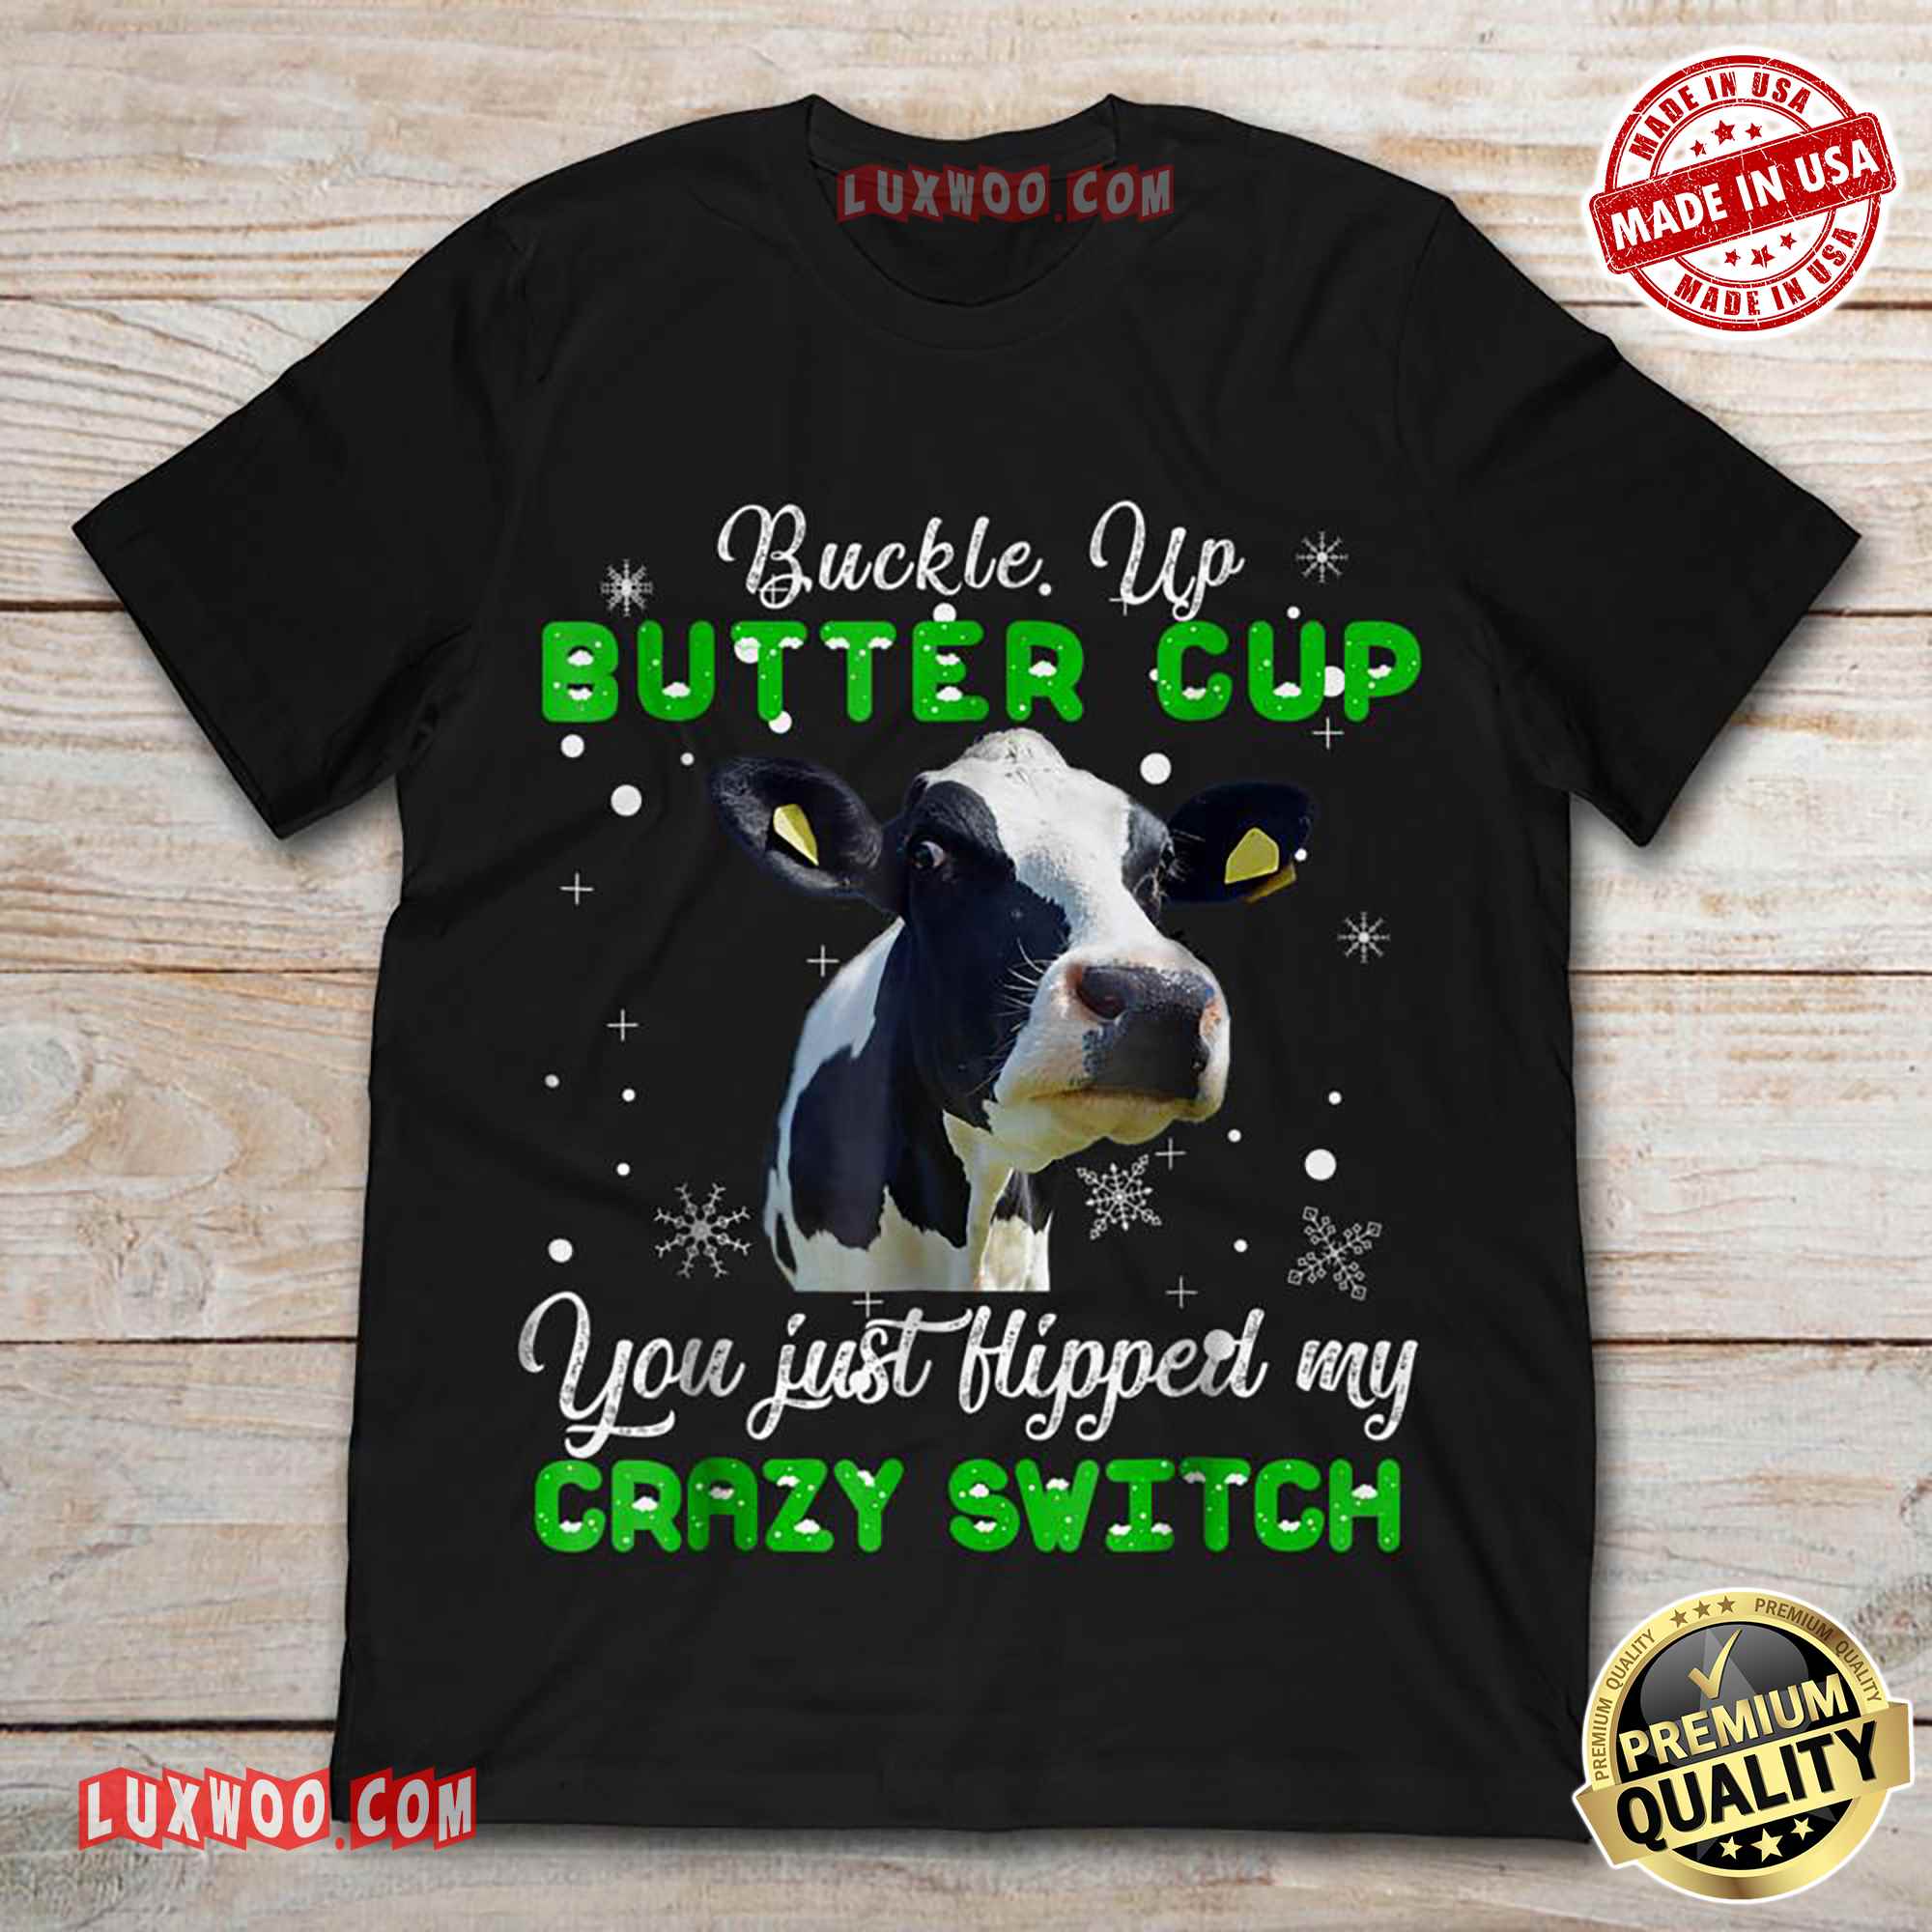 Bandana Cow Black Buckle Up Butter Cup You Just Hipped My Crazy Switch Tee Shirt